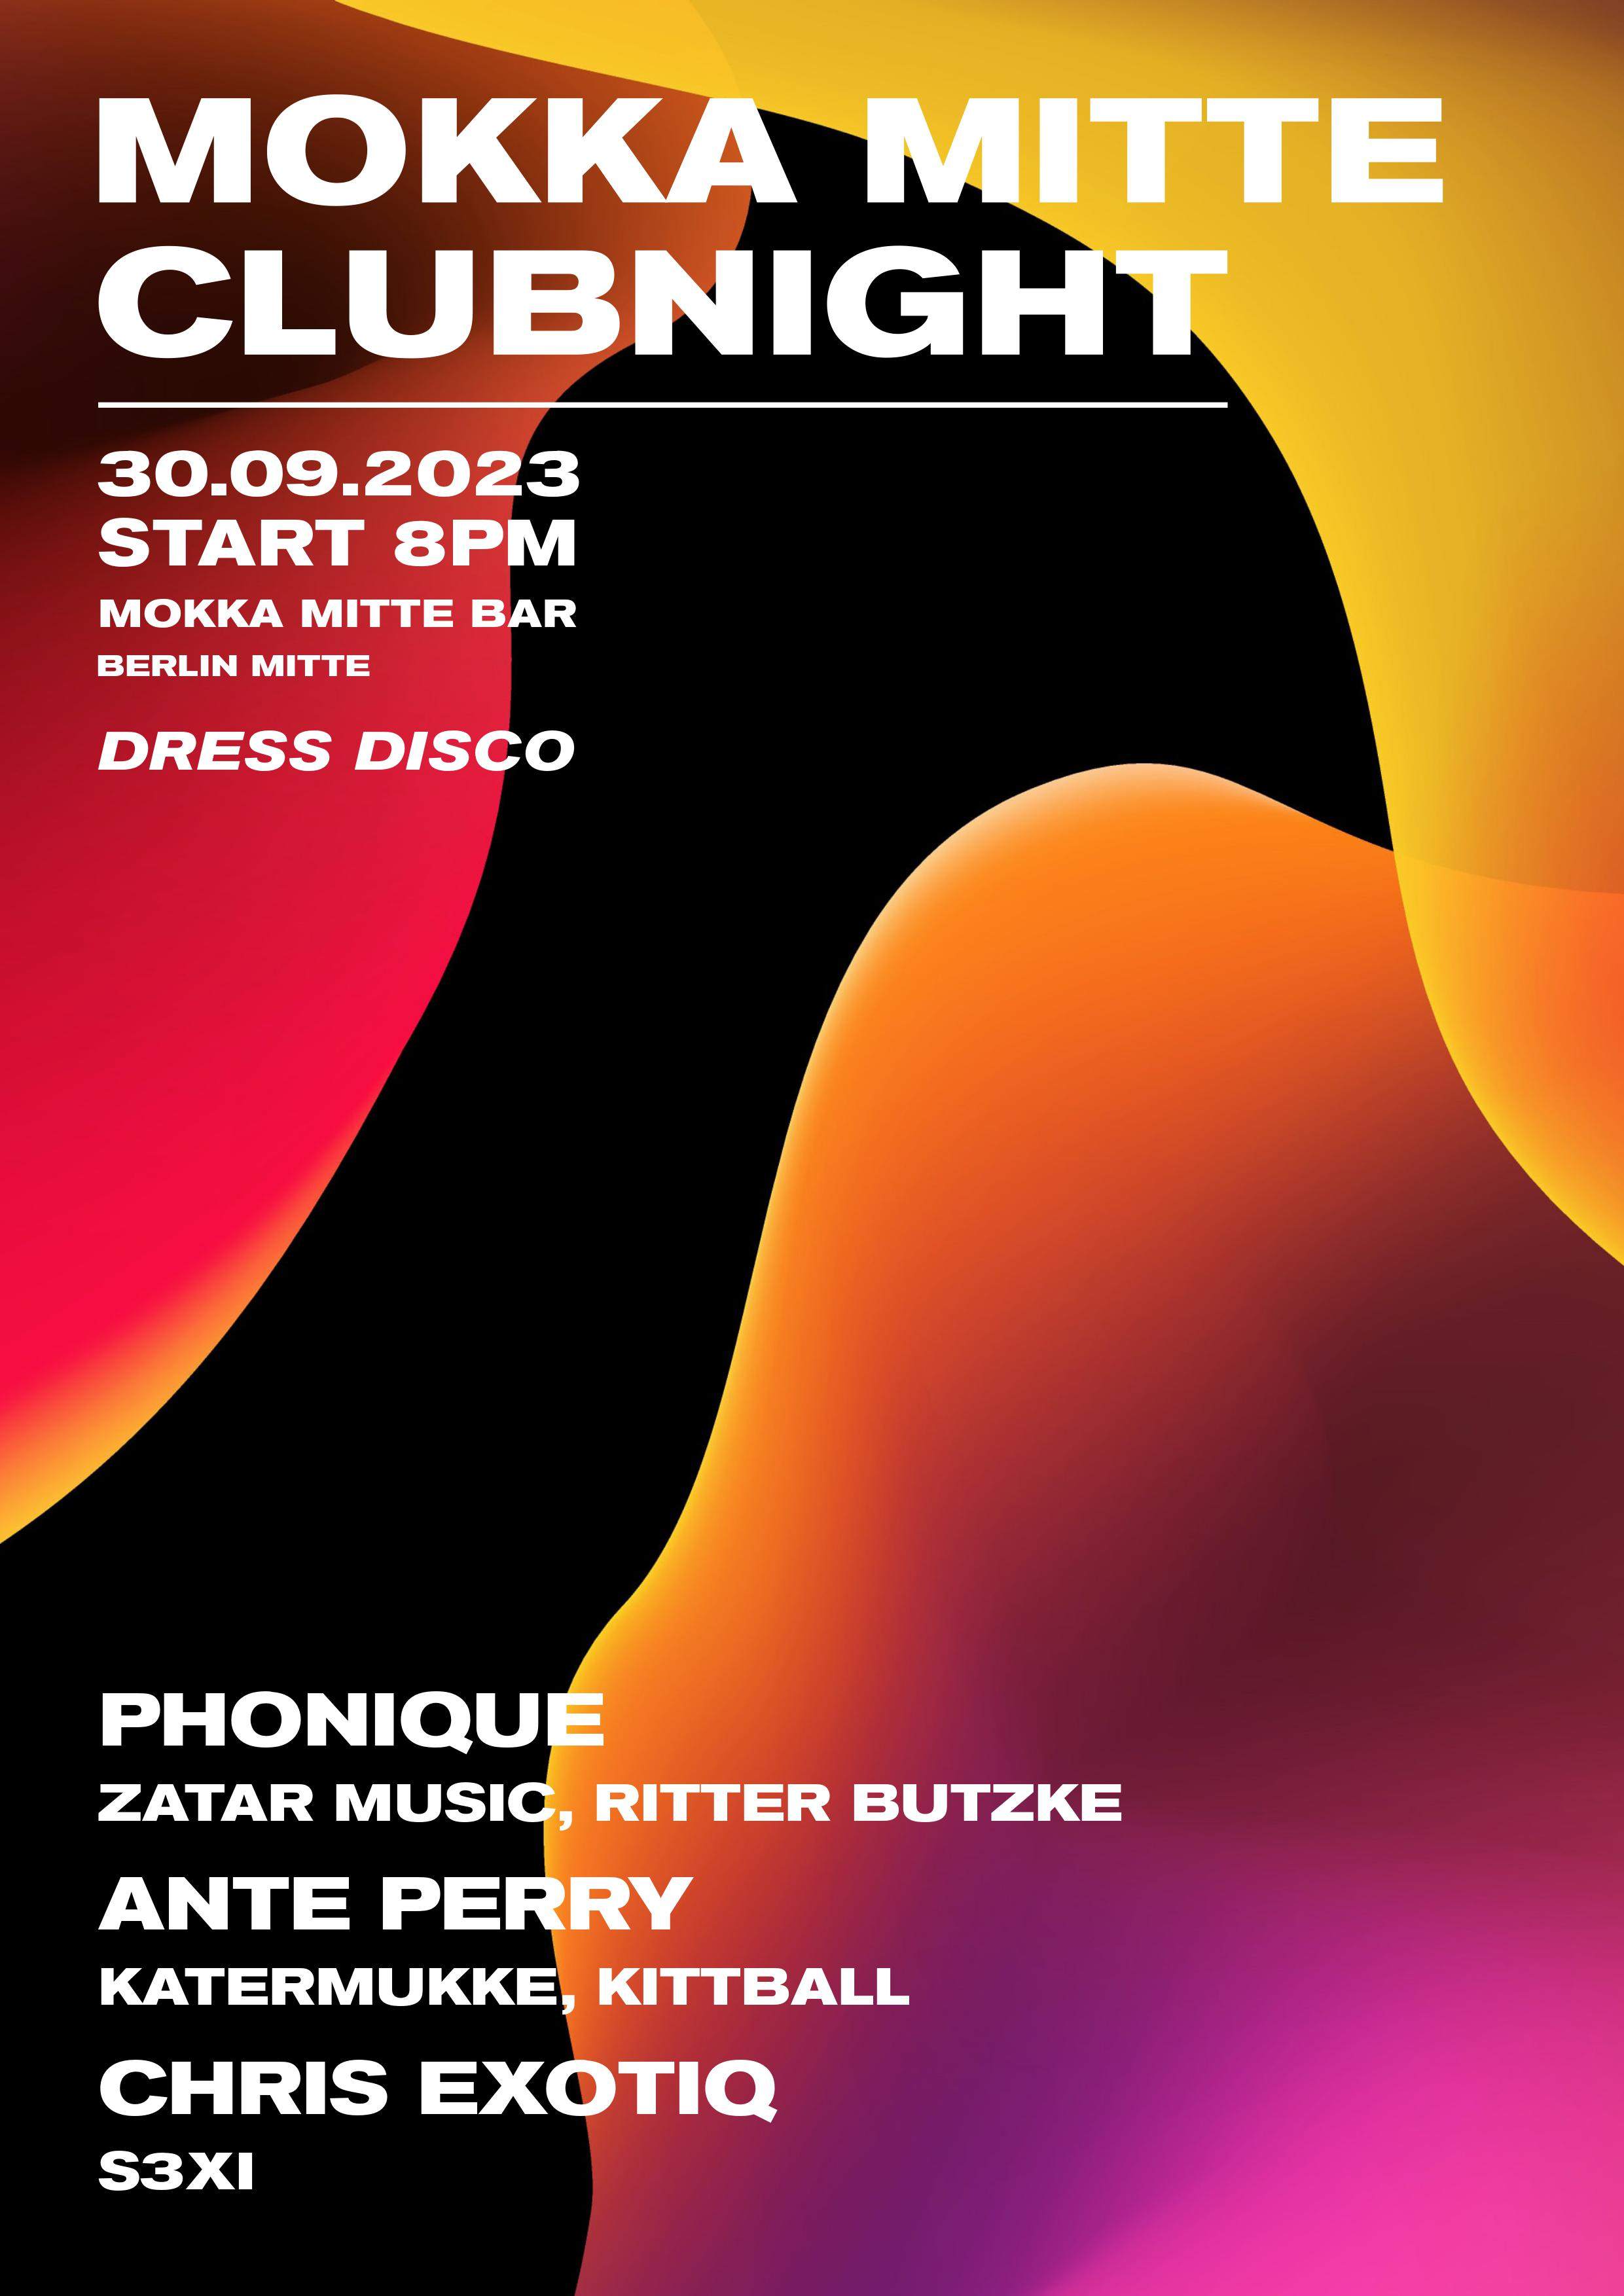 'Mokka Mitte Clubnight' with Phonique, Ante Perry & Chris Exotiq - Página frontal